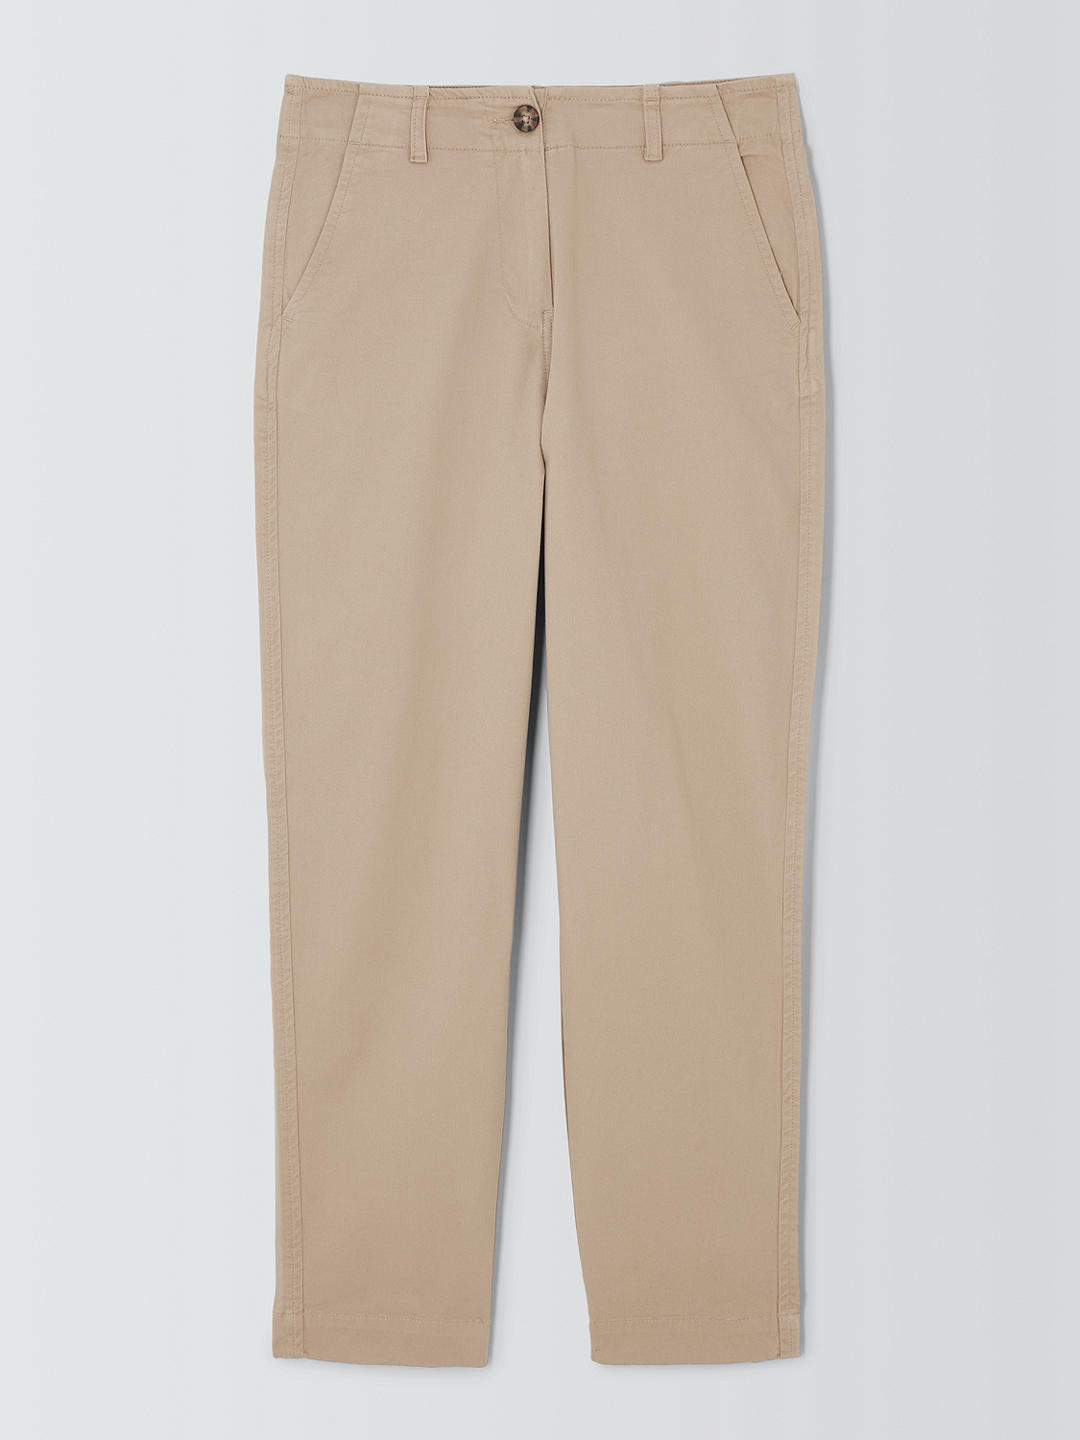 John Lewis Tapered Cotton Blend Chino Trousers, Natural